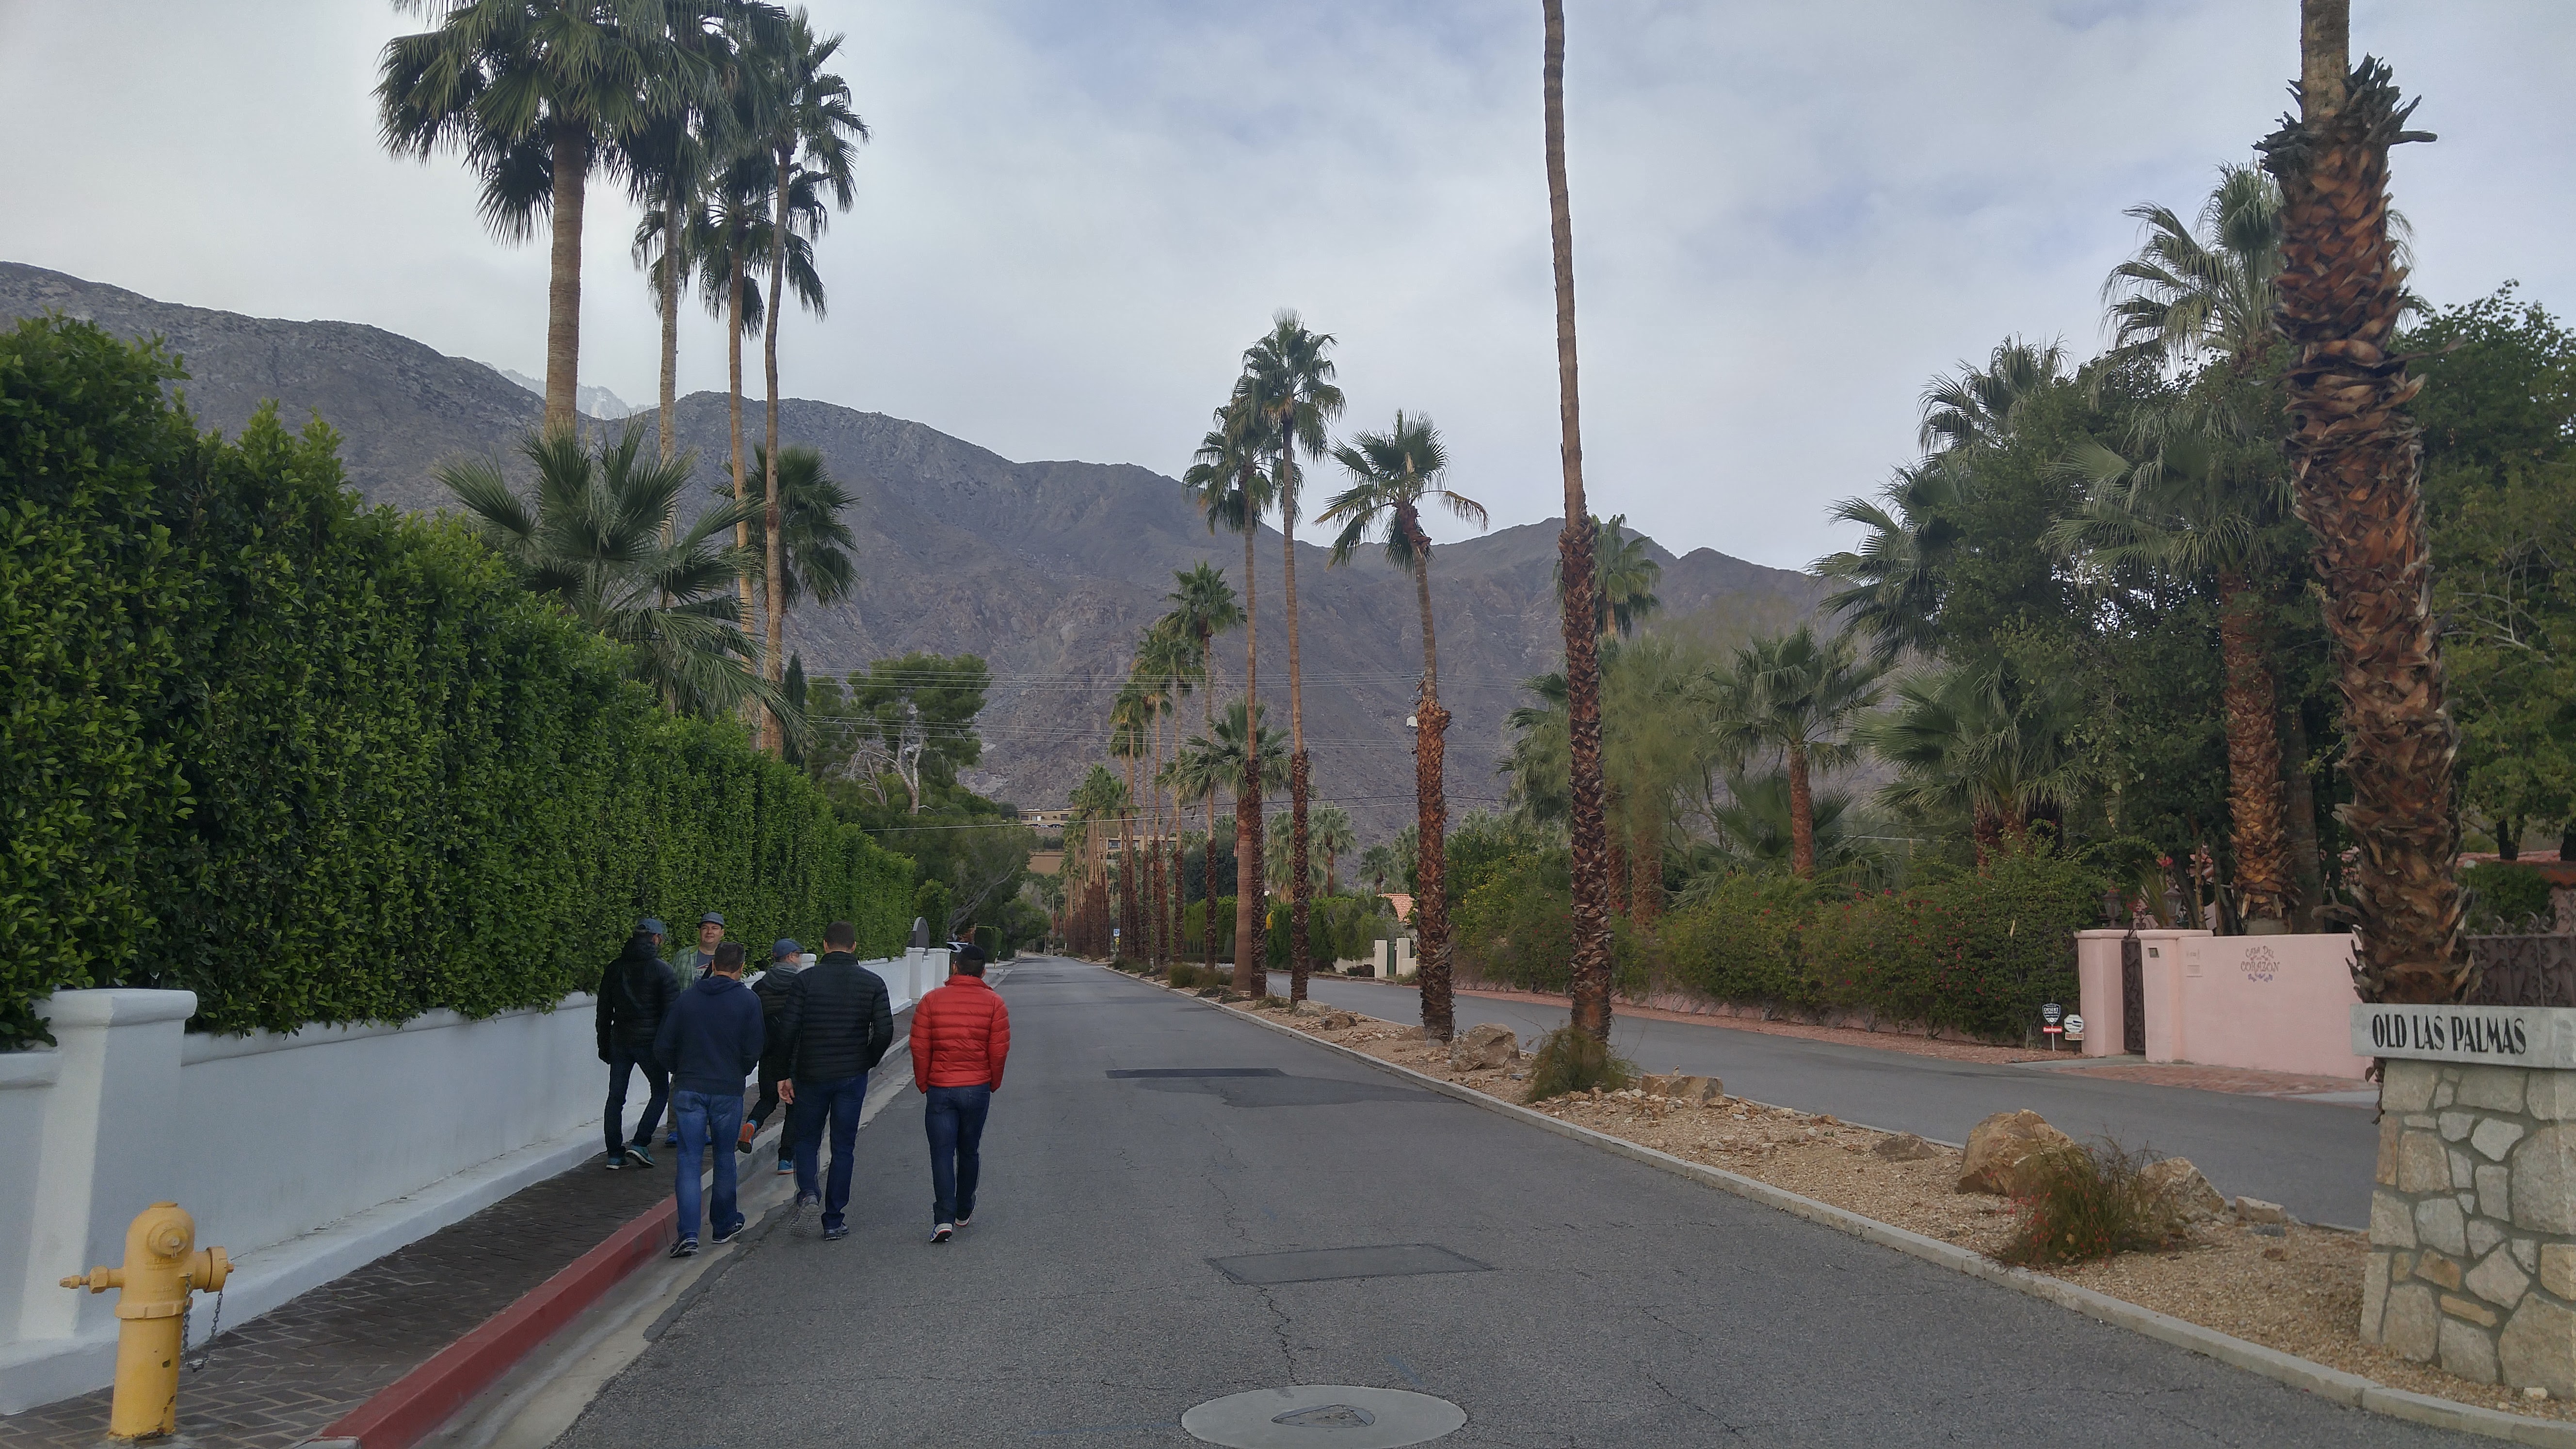 Walking Tour in Palm Springs - The Danish Tour Guide 